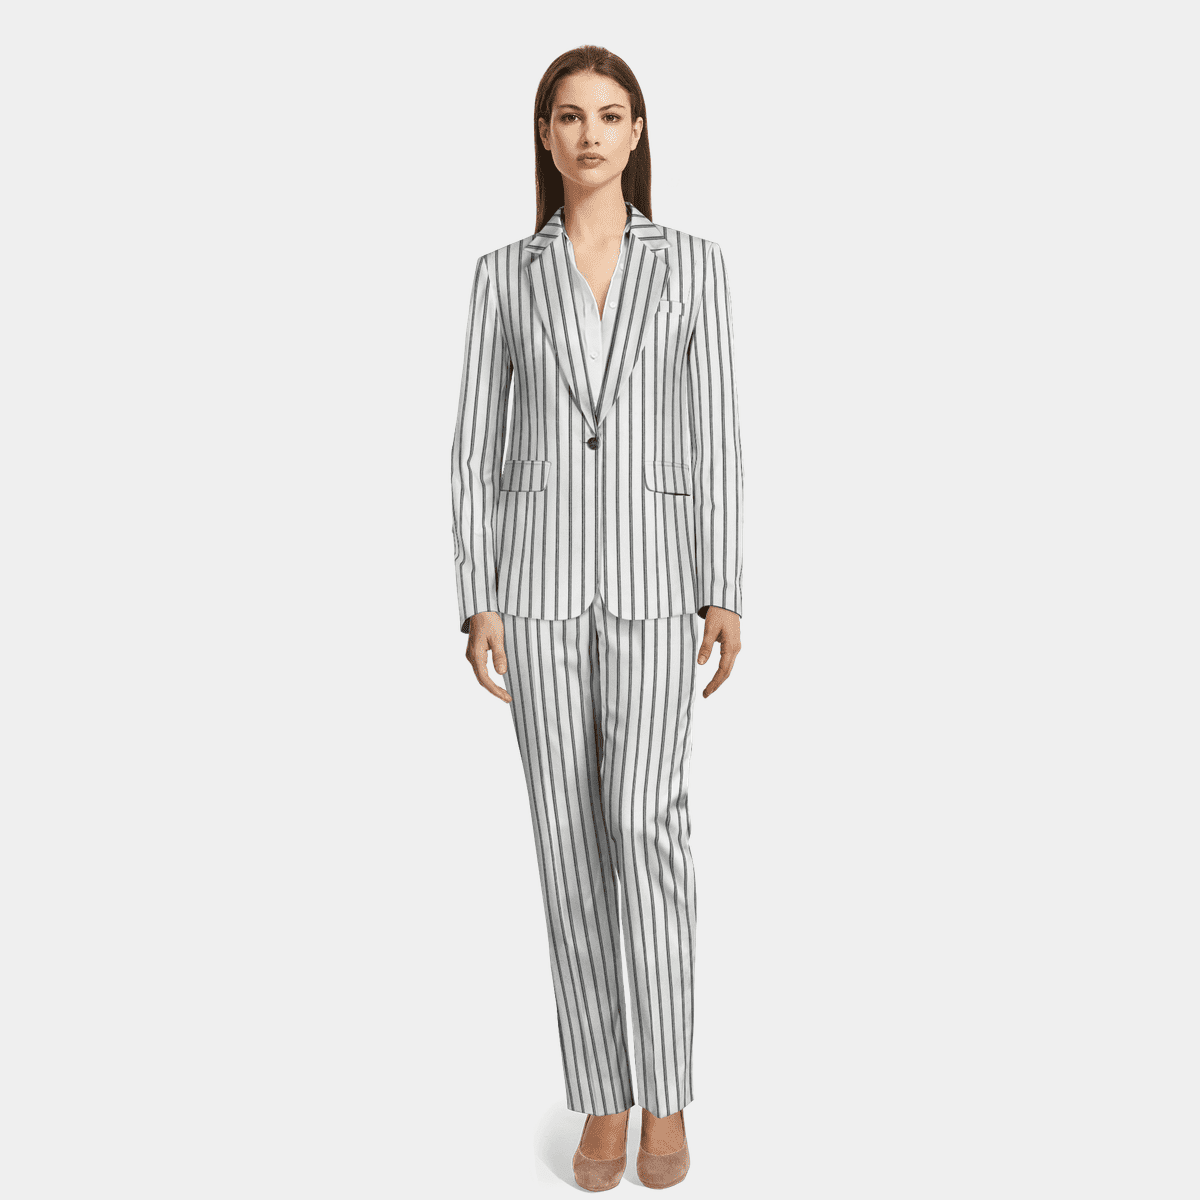 White striped linen Woman Suit - relaxed fit